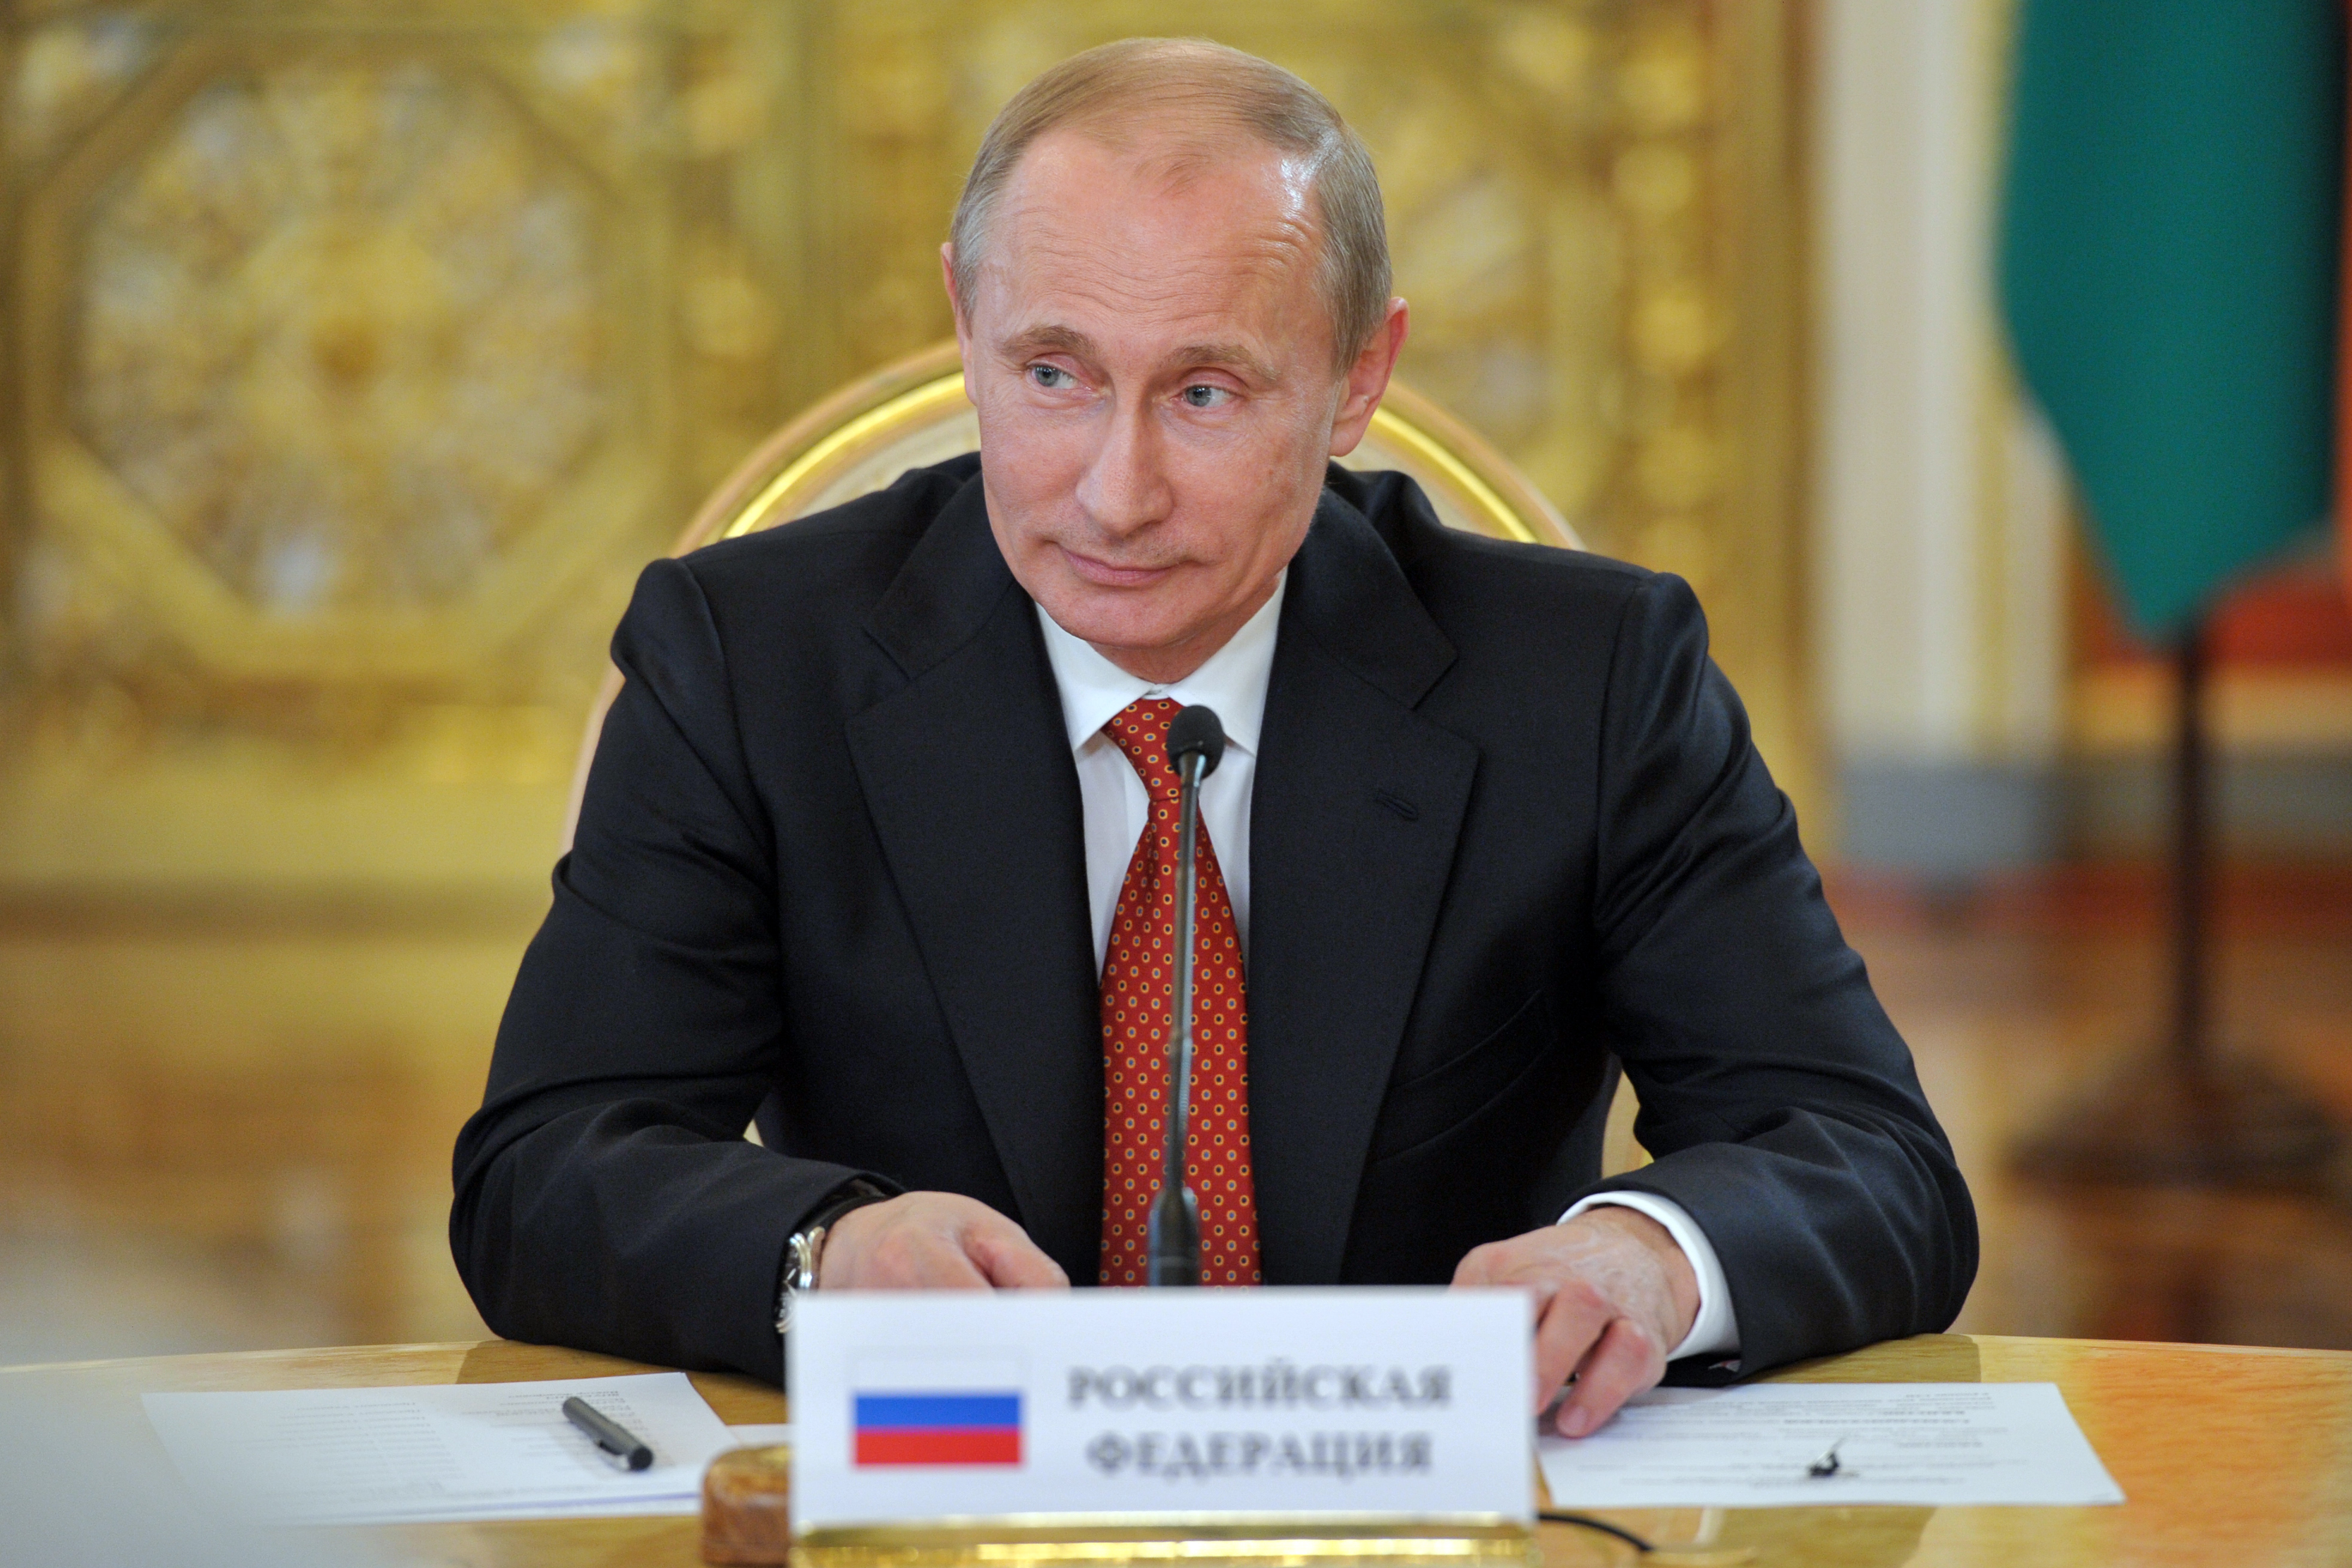 Russia’s Evolving South Asia Policy